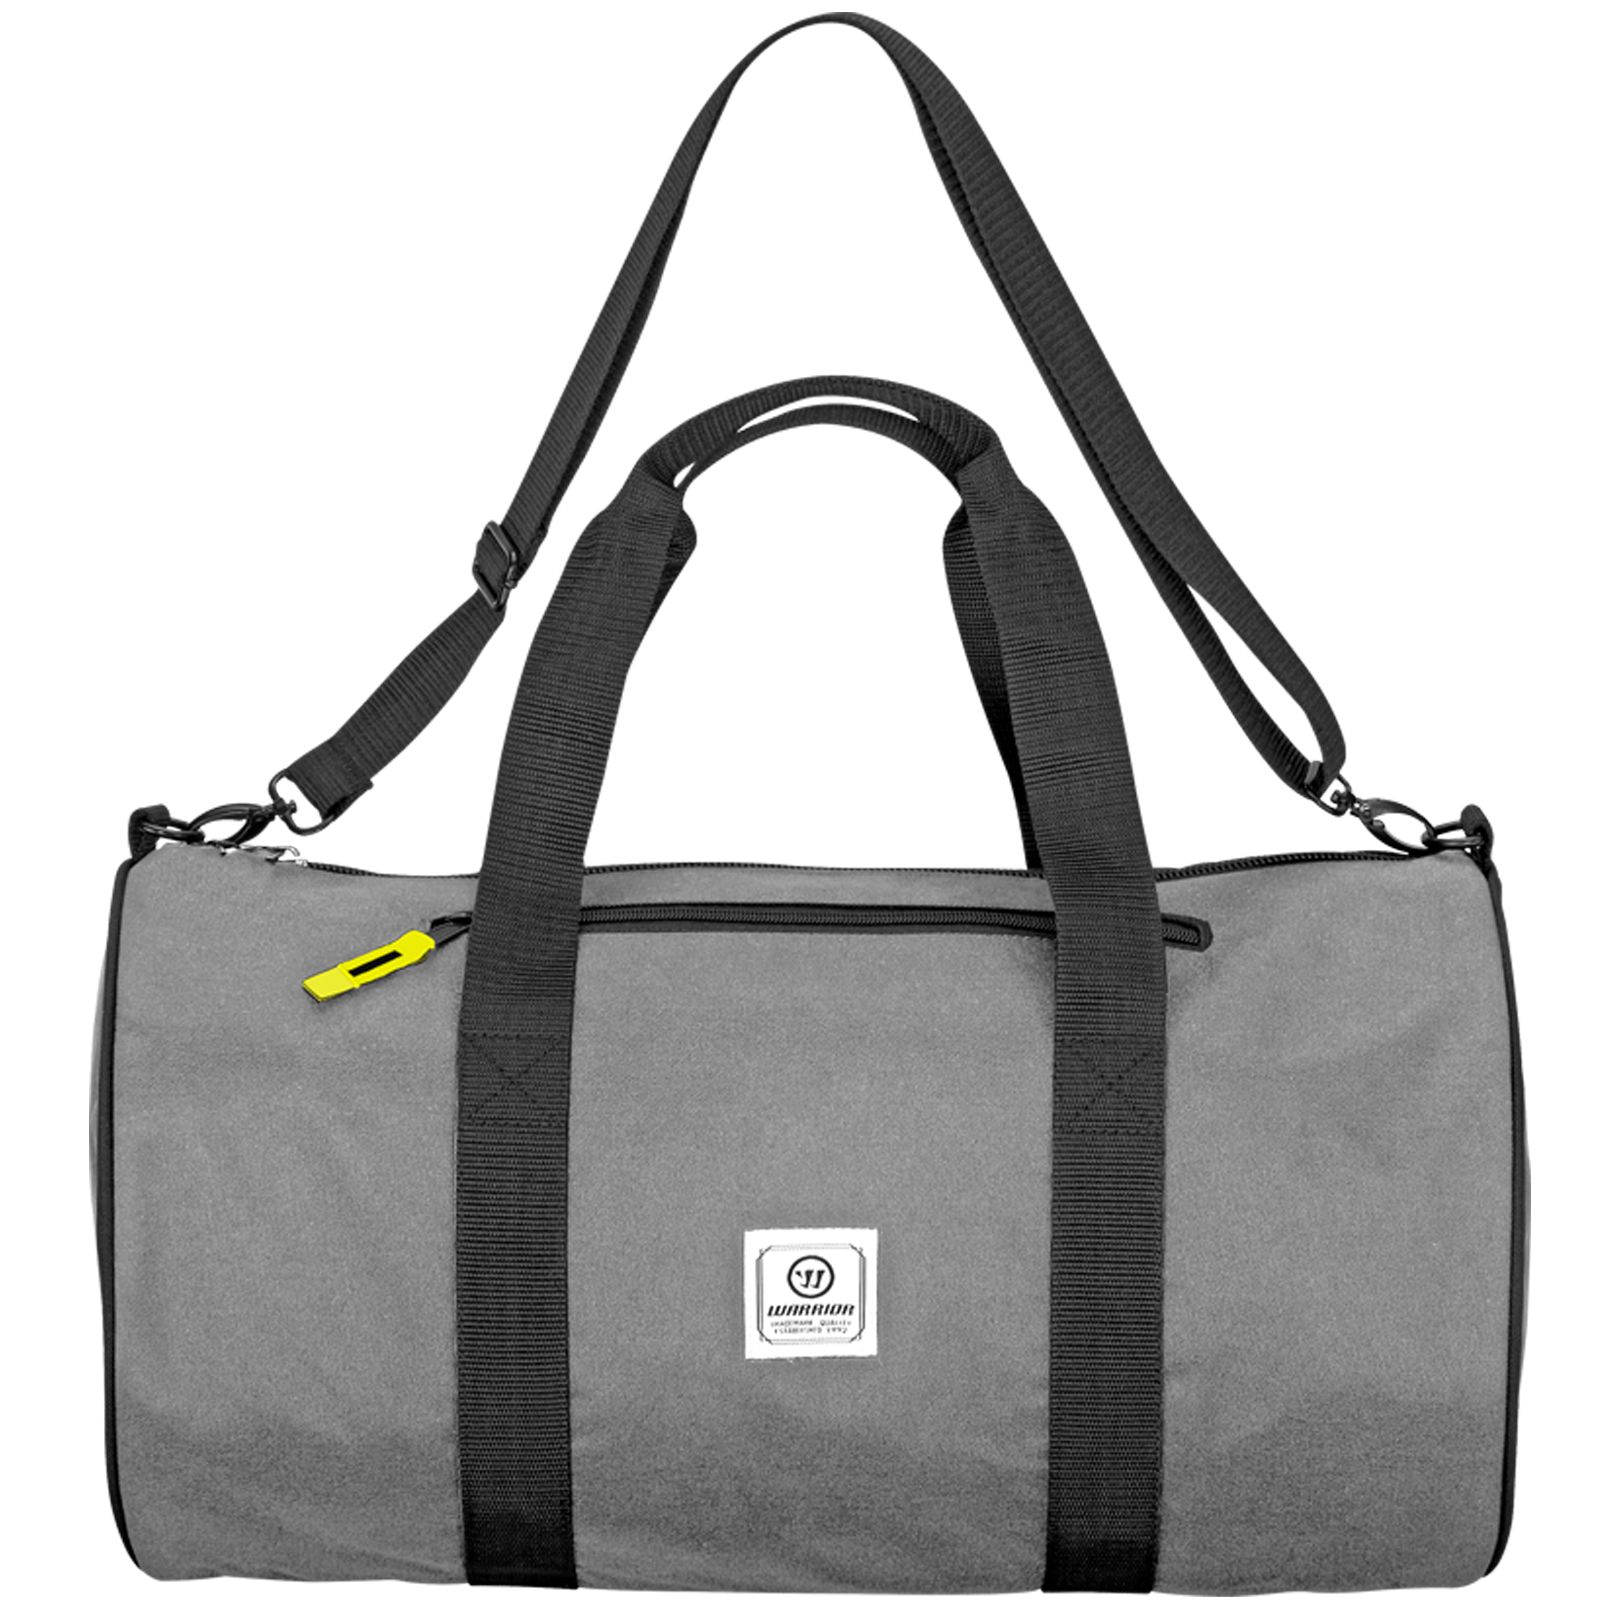 Q10 Day Duffle Bag, Grey image number 0